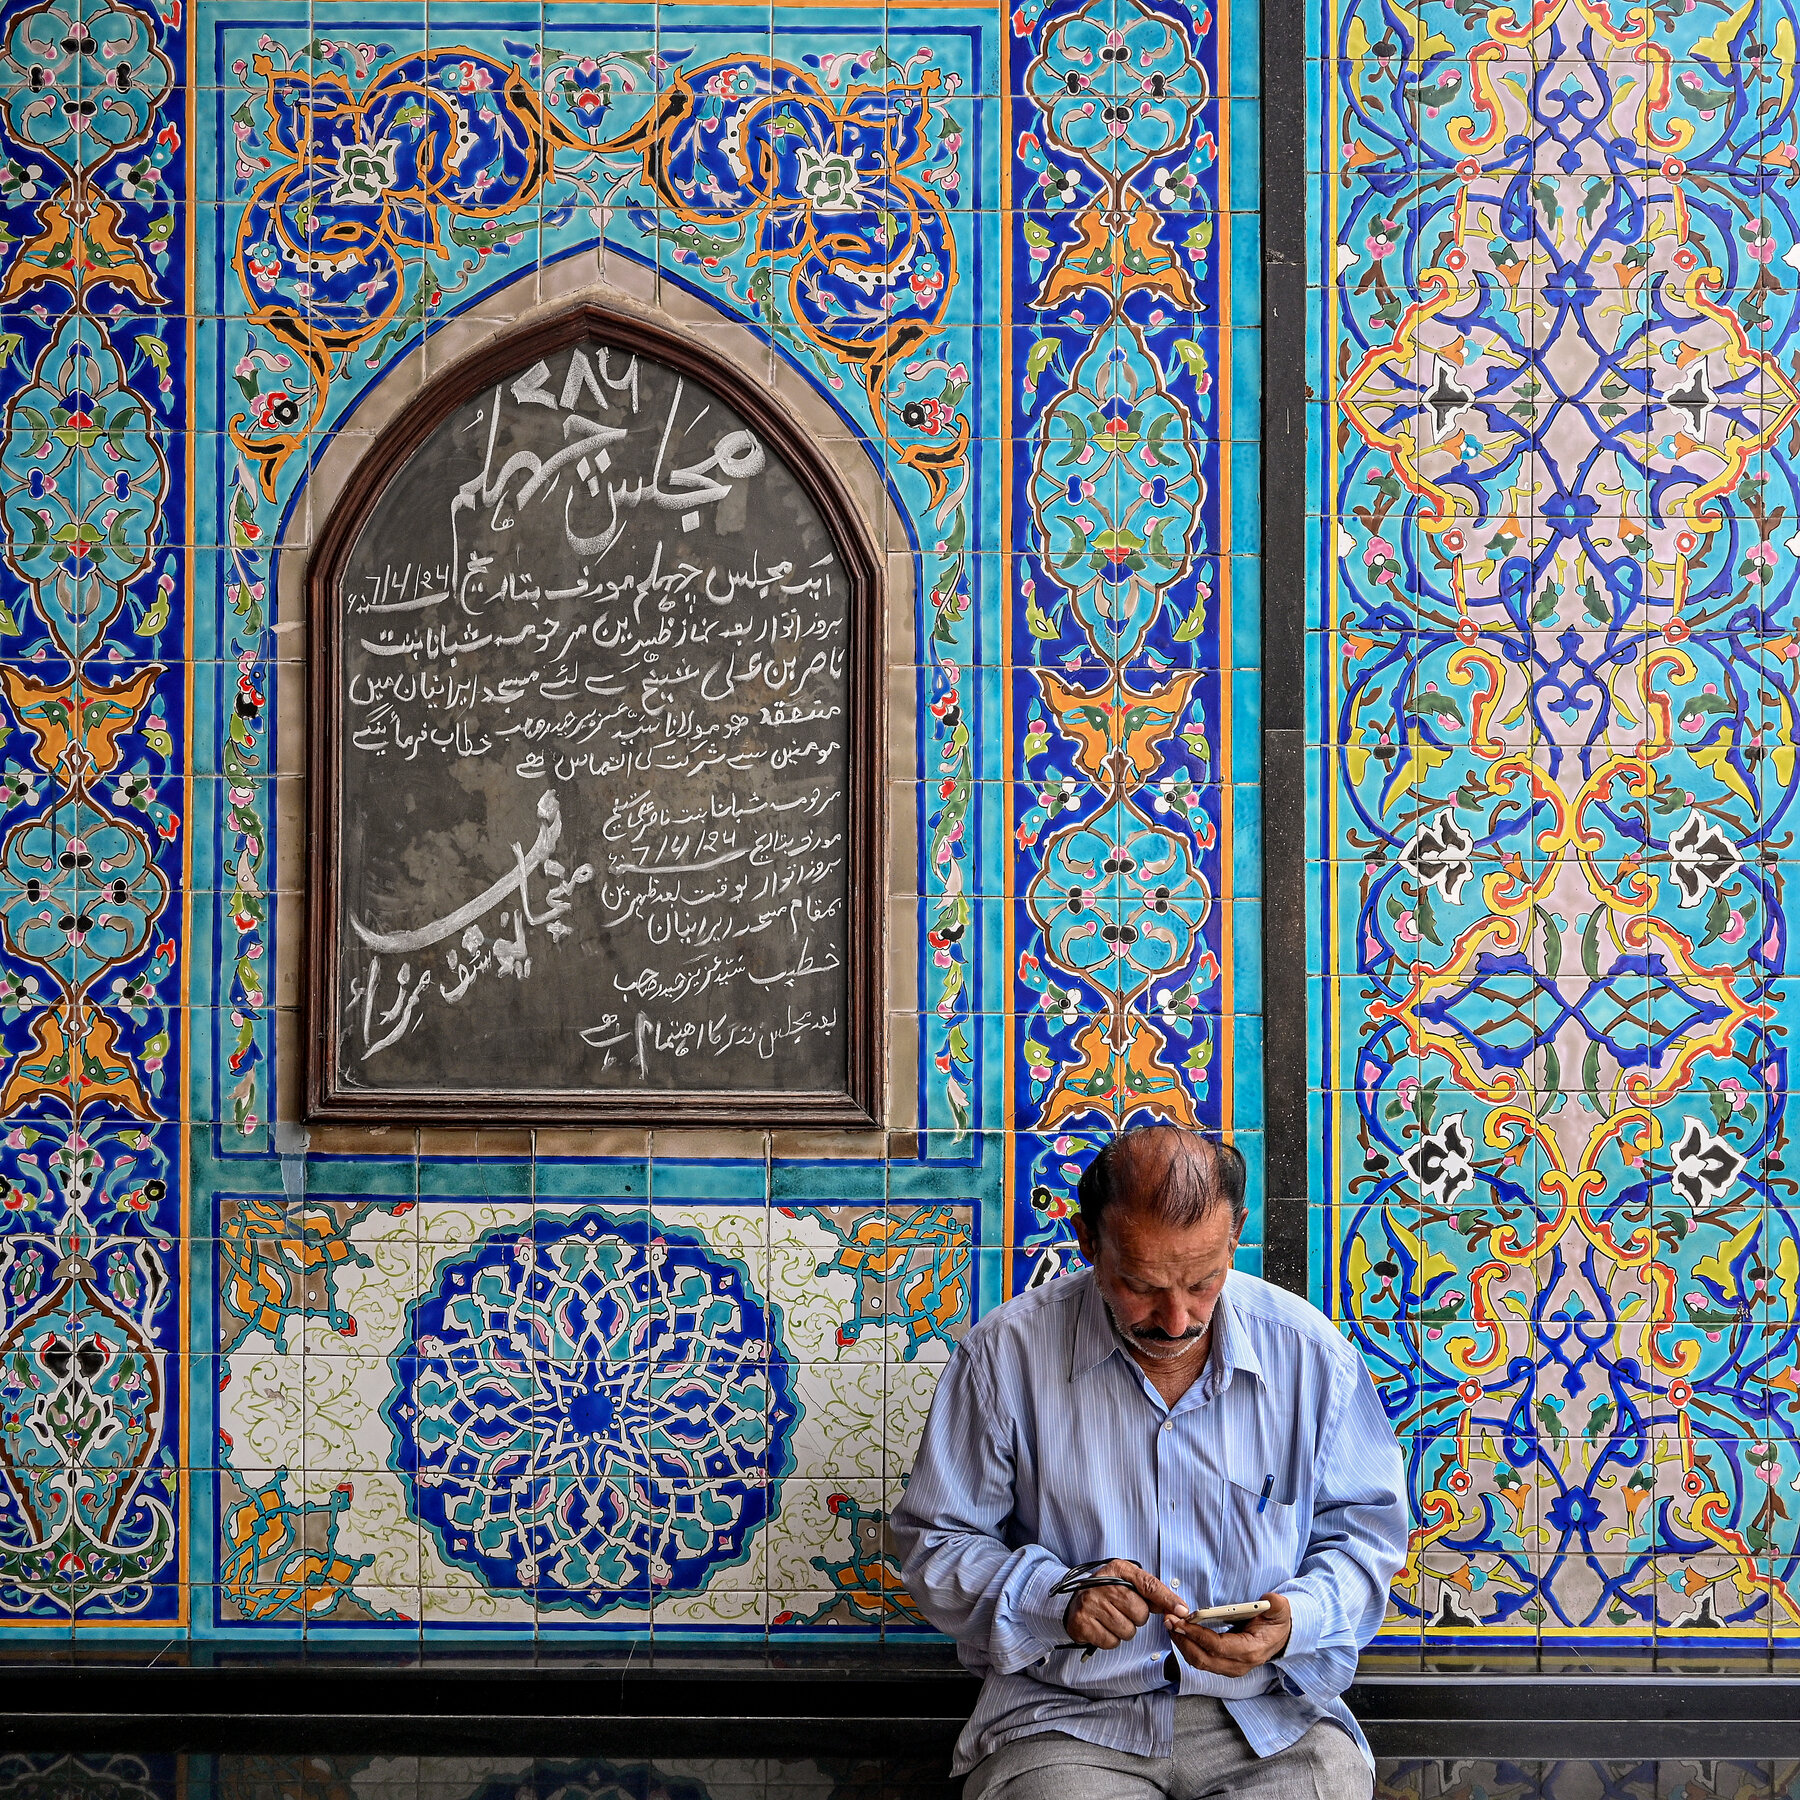 A person wearing a collared shirt rests against a wall that features vibrant blue tiling in geometric patterns. 